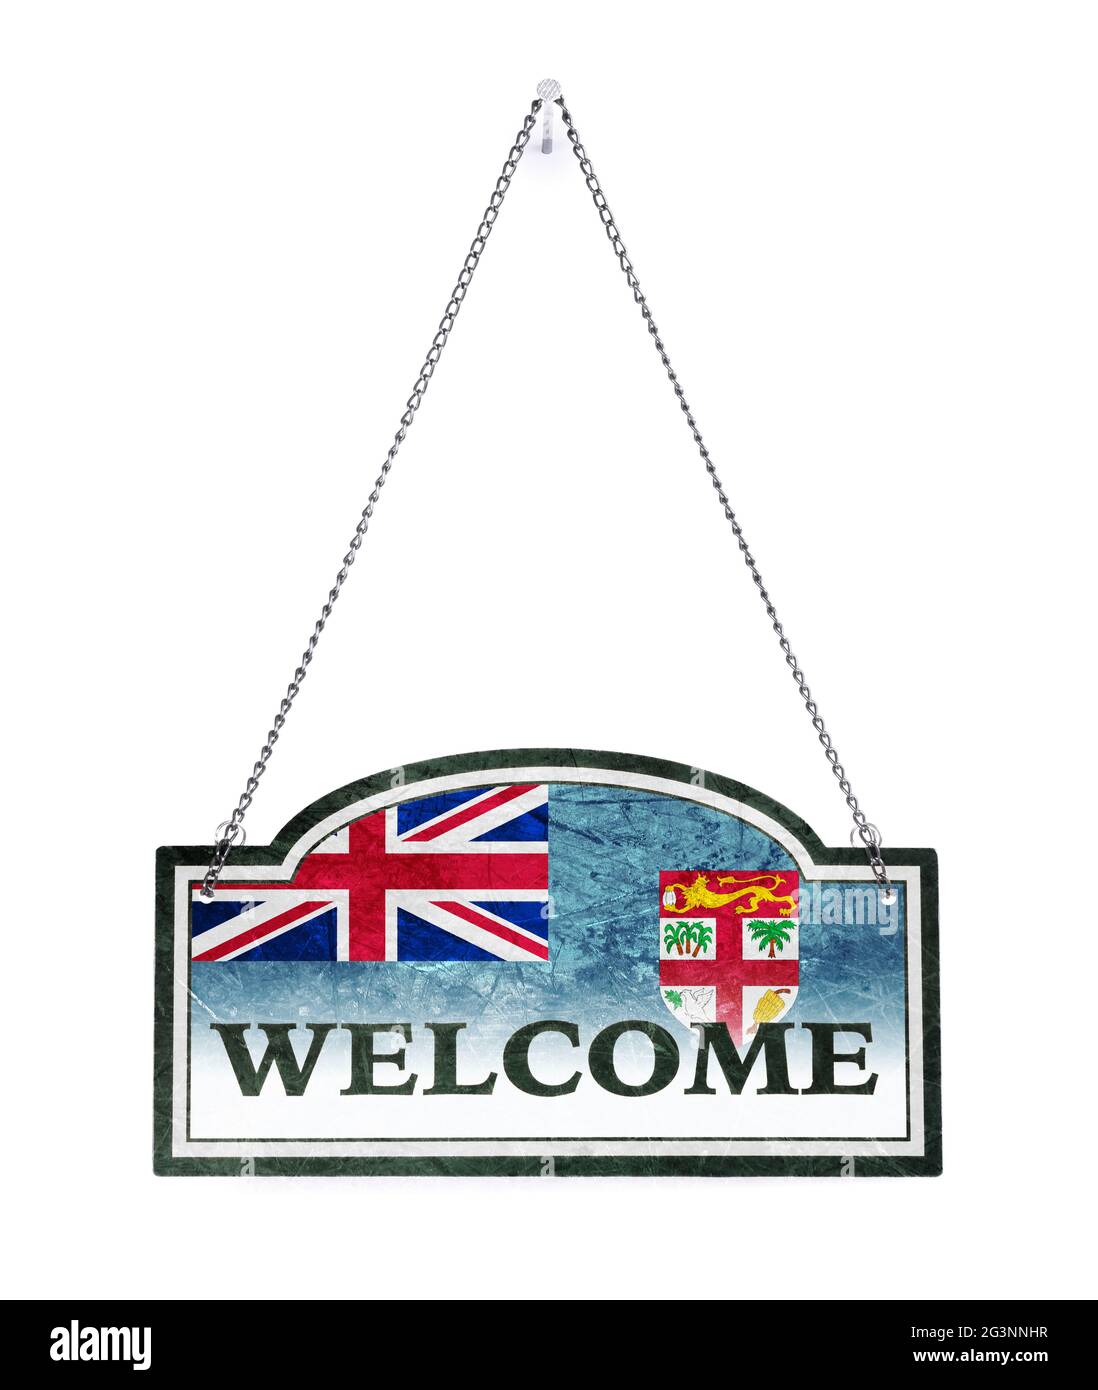 Fiji welcomes you! Old metal sign isolated Stock Photo